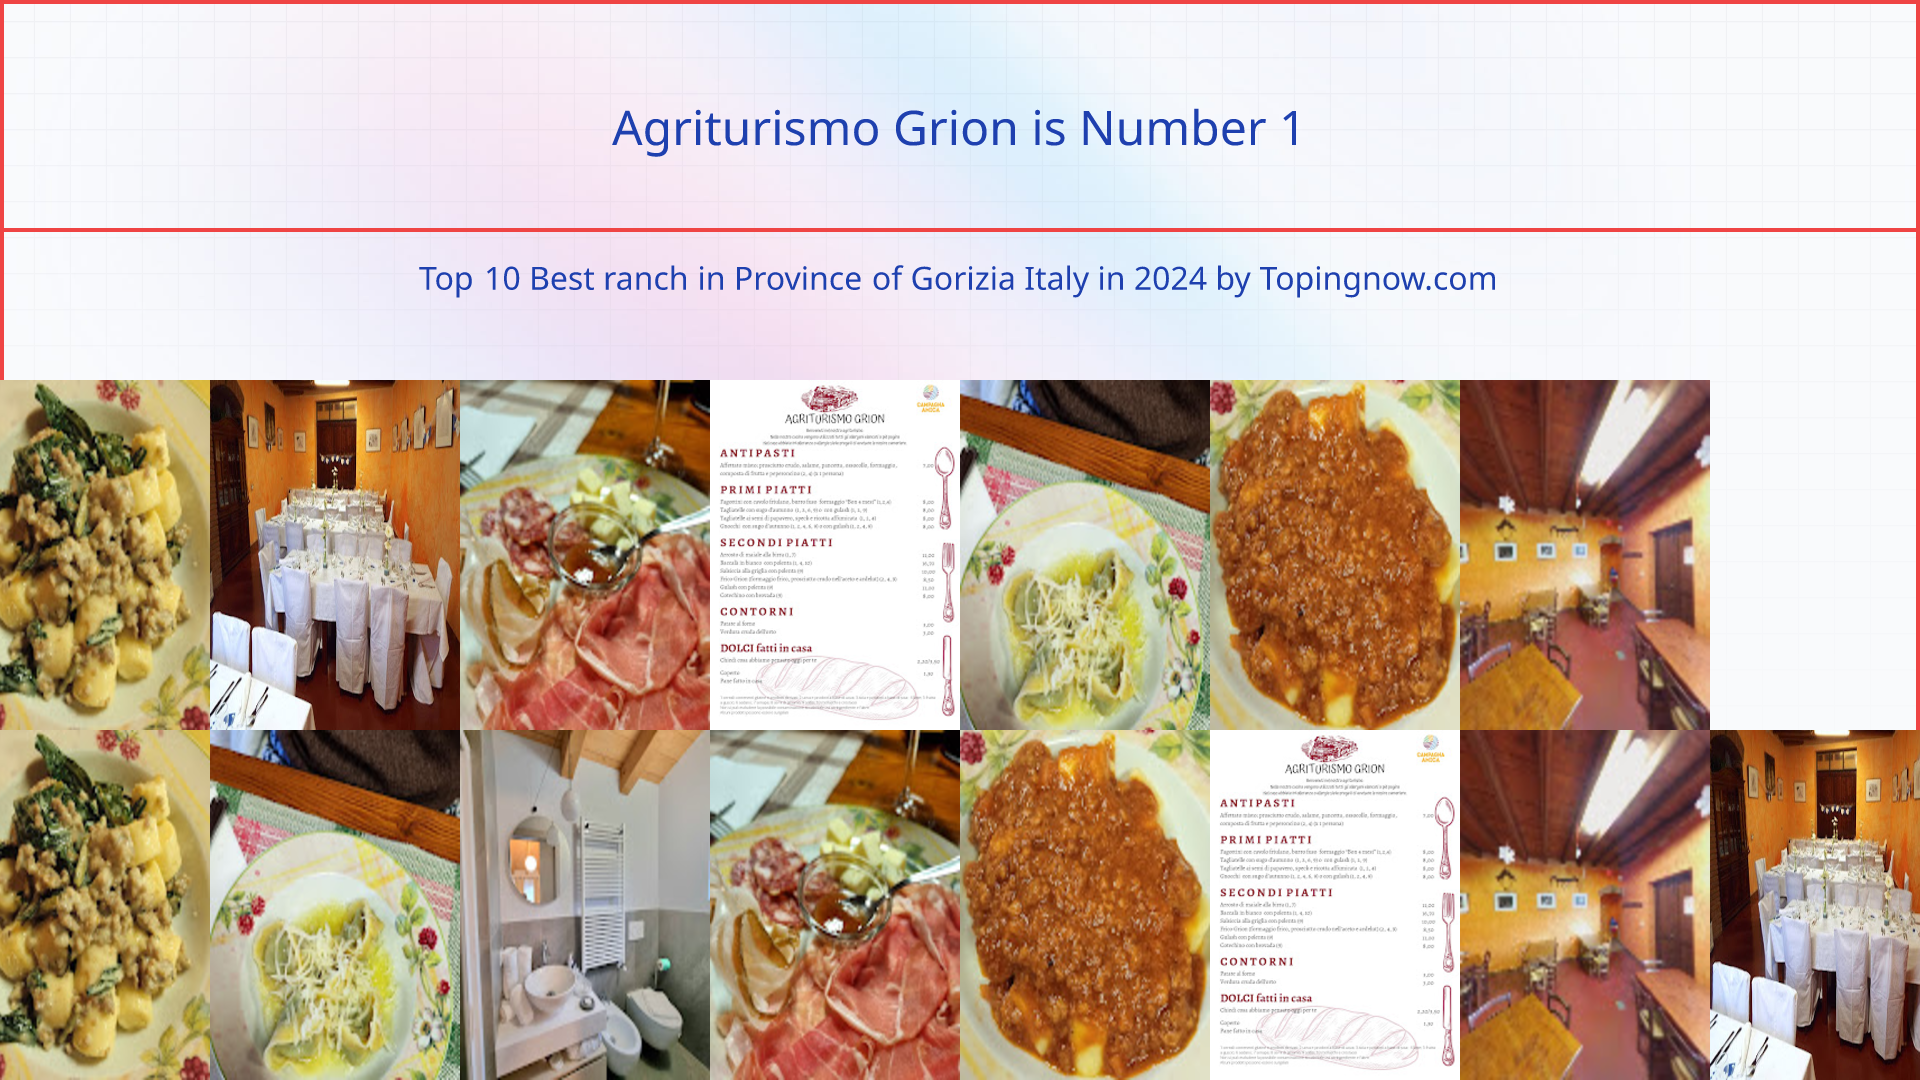 Agriturismo Grion: Top 10 Best ranch in Province of Gorizia Italy in 2024